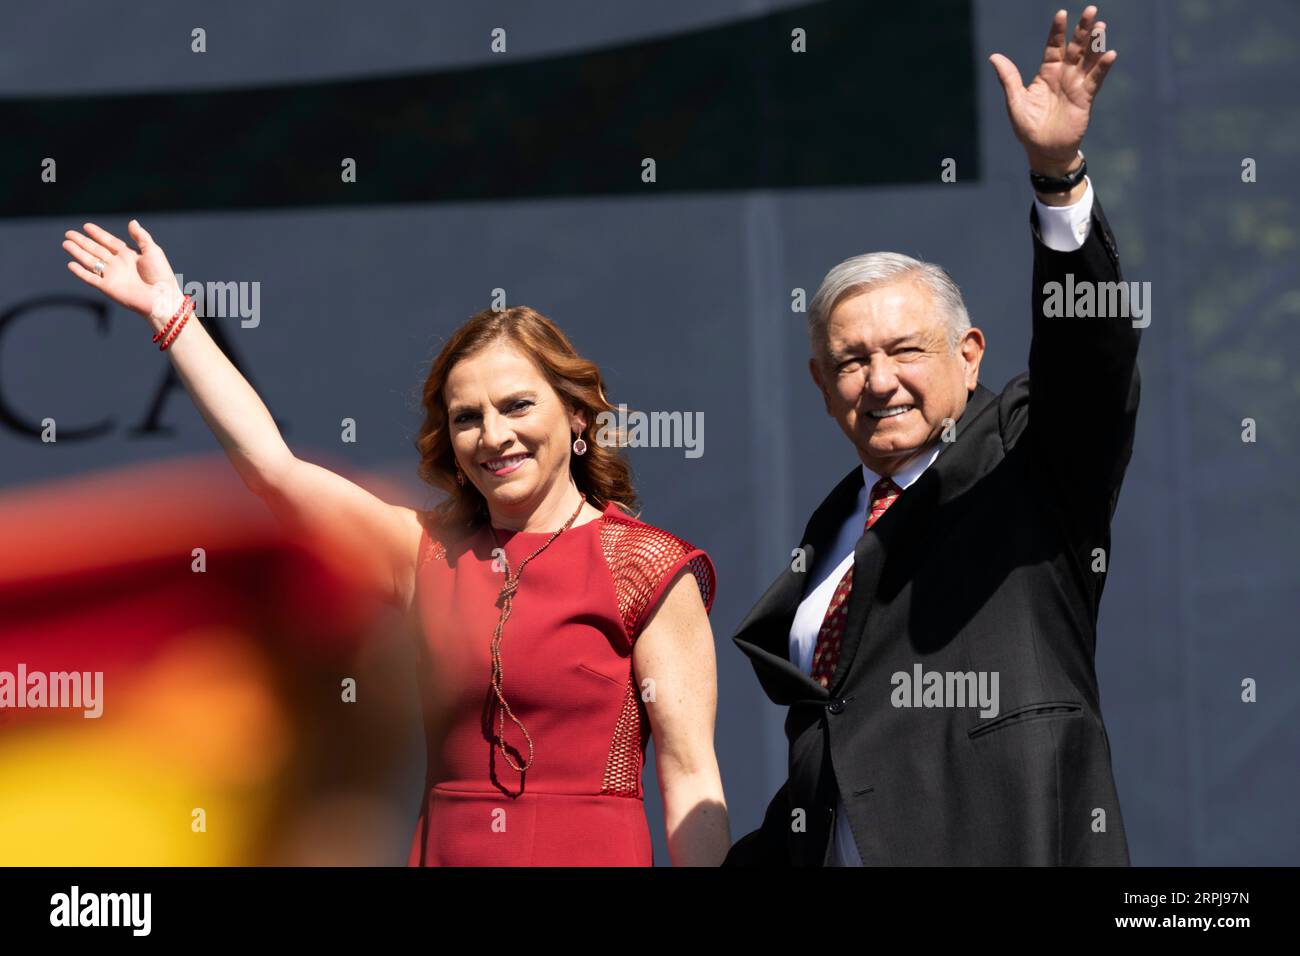 191202 -- MEXICO CITY, Dec. 2, 2019 -- Mexican President Andres Manuel Lopez Obrador R greets his supporters accompanied by his wife Beatriz Gutierrez Muller during a ceremony marking his first full year in office in Mexico City, capital of Mexico, on Dec. 1, 2019. Decreasing Mexico s high rates of violent crime is the government s main challenge, President Andres Manuel Lopez Obrador said on Sunday. Photo by /Xinhua MEXICO-MEXICO CITY-PRESIDENT-CEREMONY DavidxdexlaxPaz PUBLICATIONxNOTxINxCHN Stock Photo